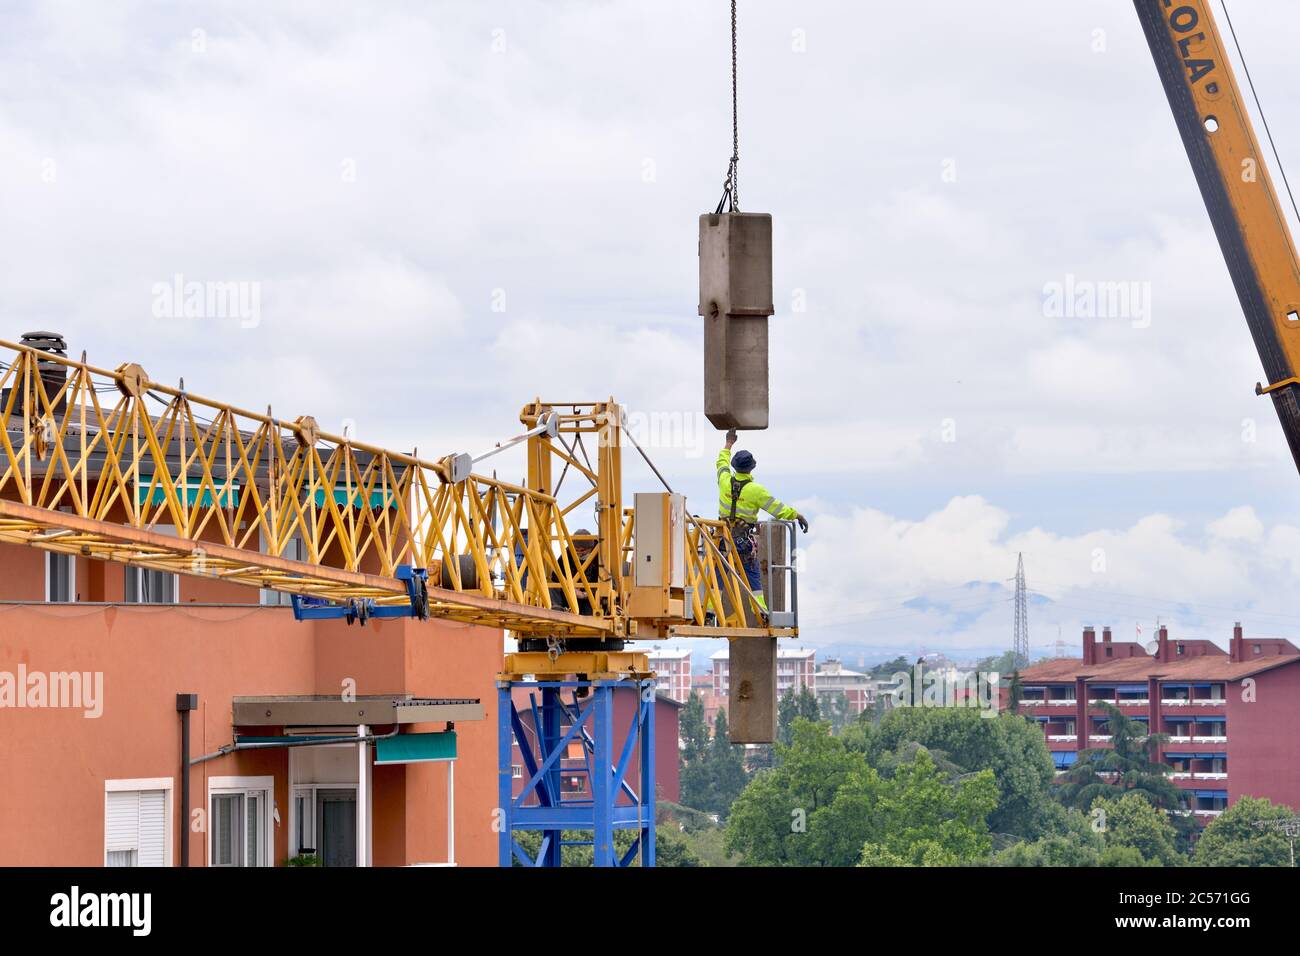 crane builder place massive concrete counterbalance weights on the boom arm Tower Stock Photo